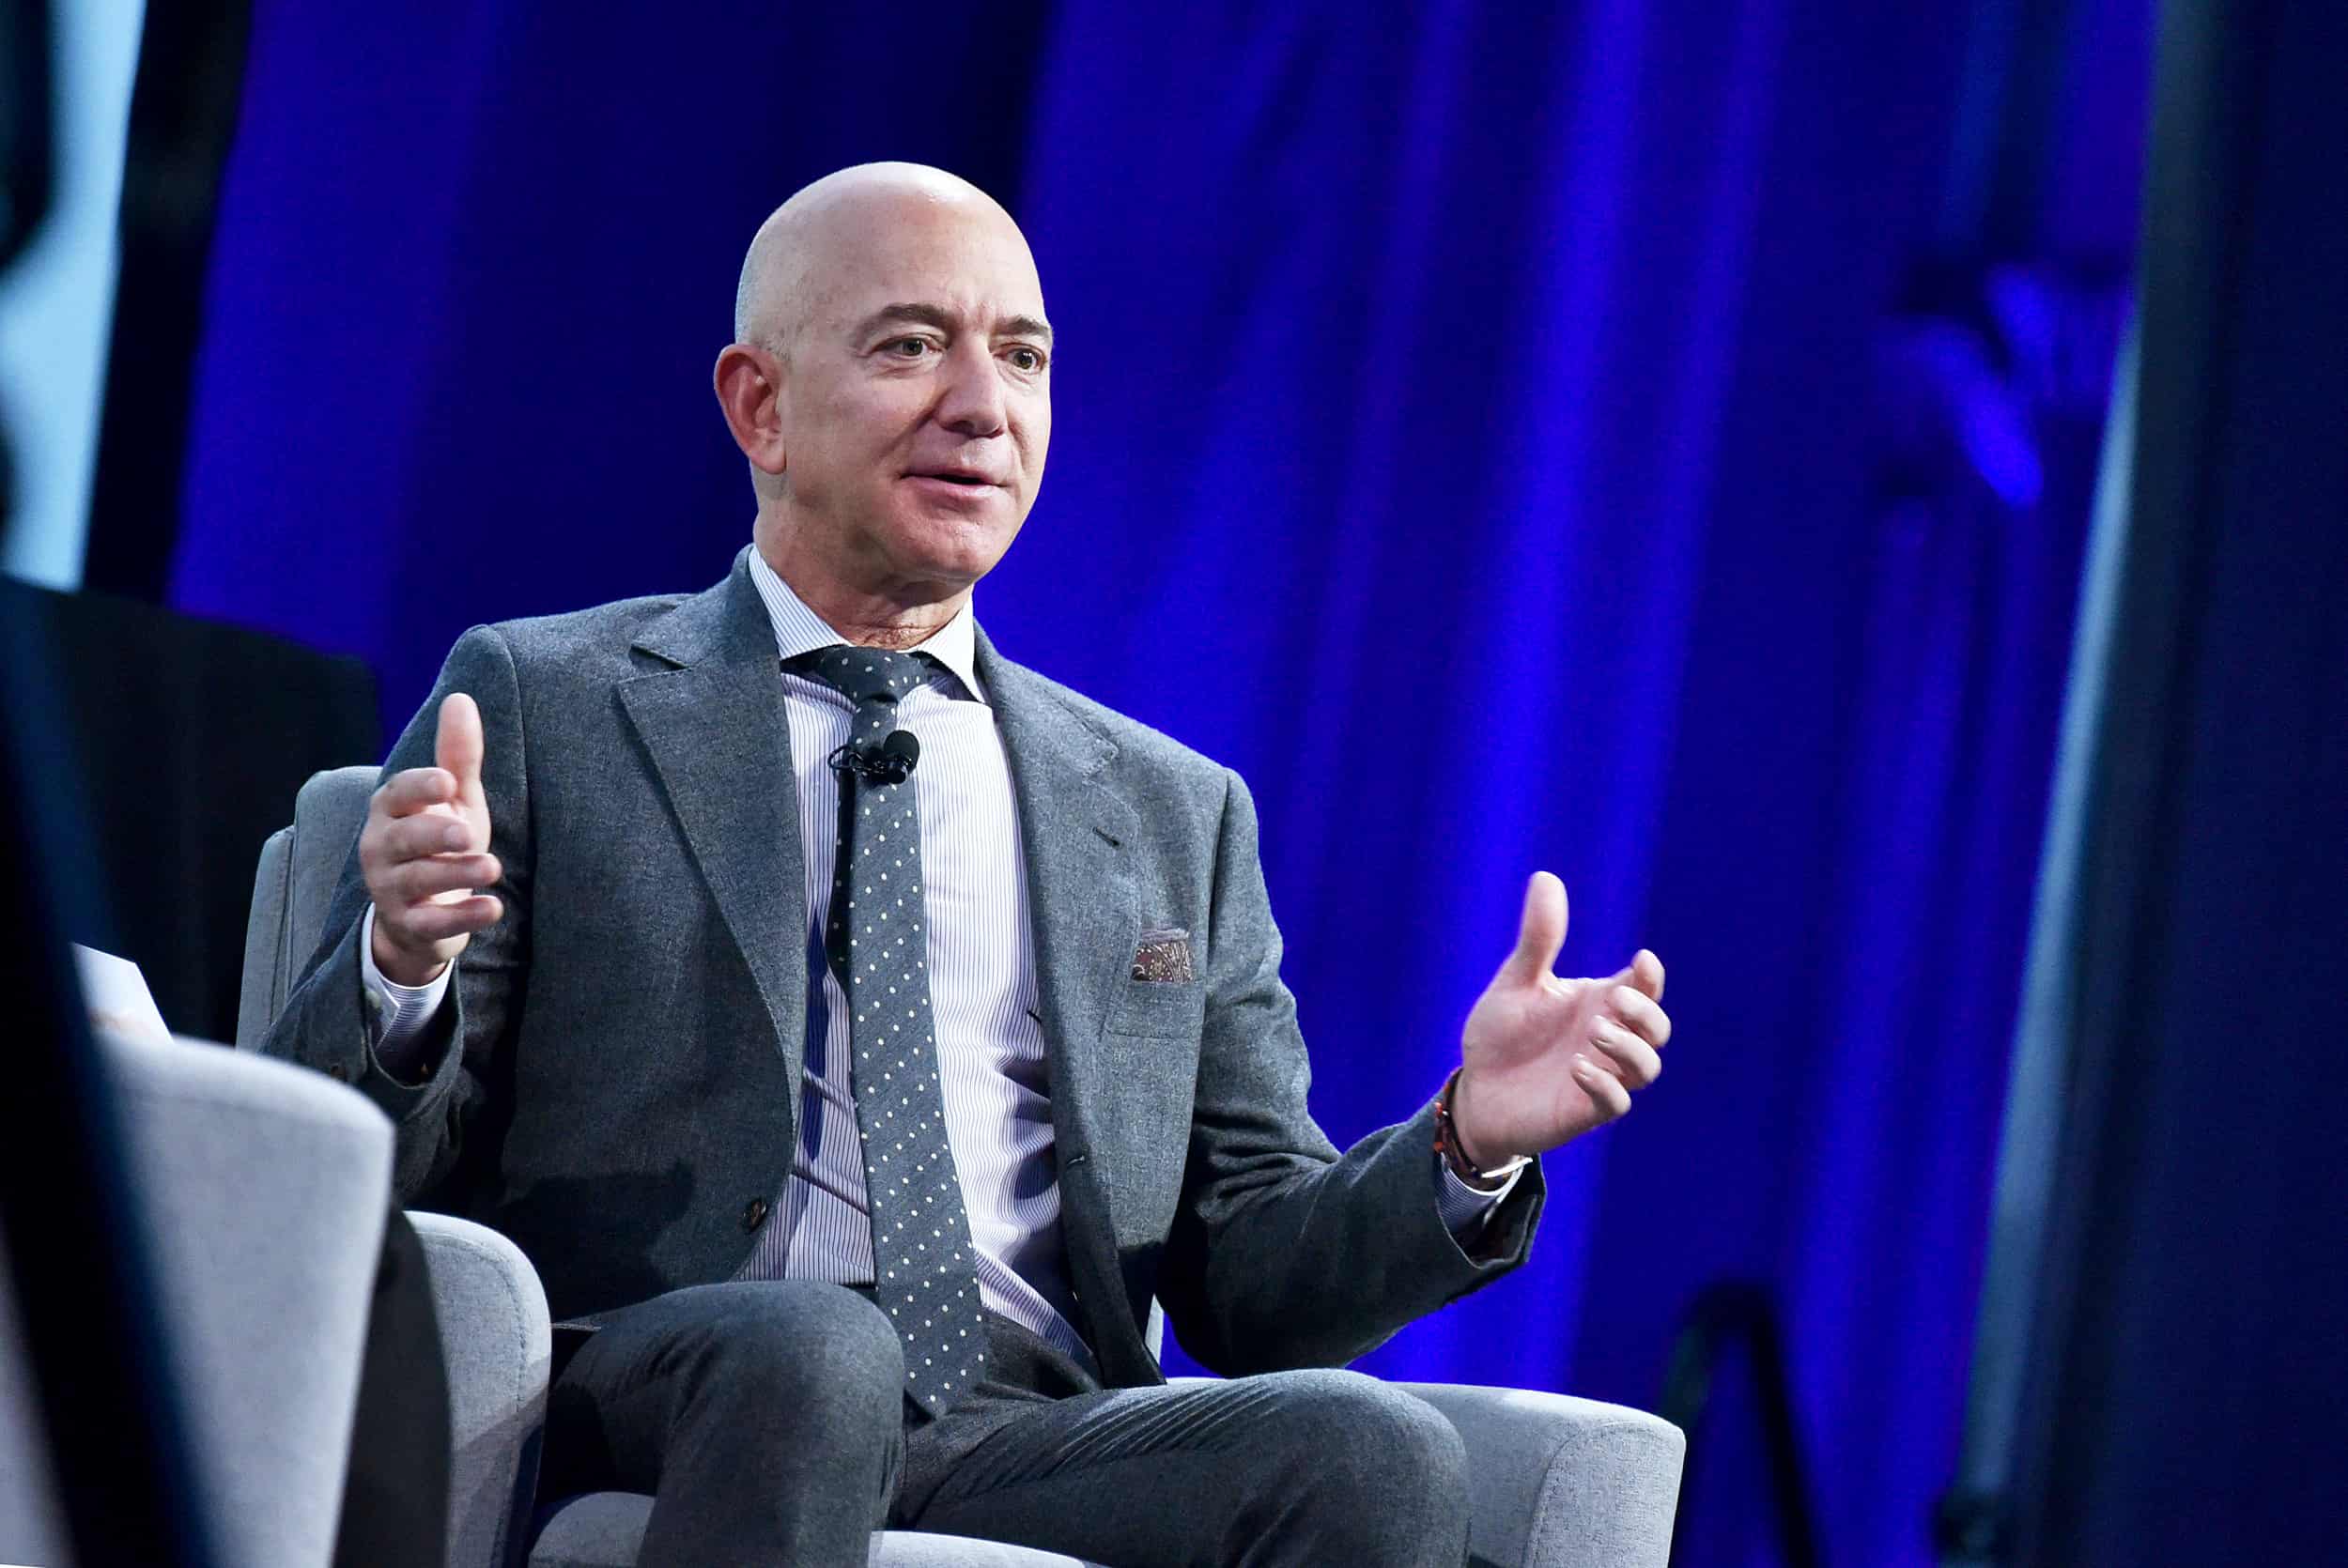 World’s richest person Jeff Bezos to step down as Amazon’s CEO